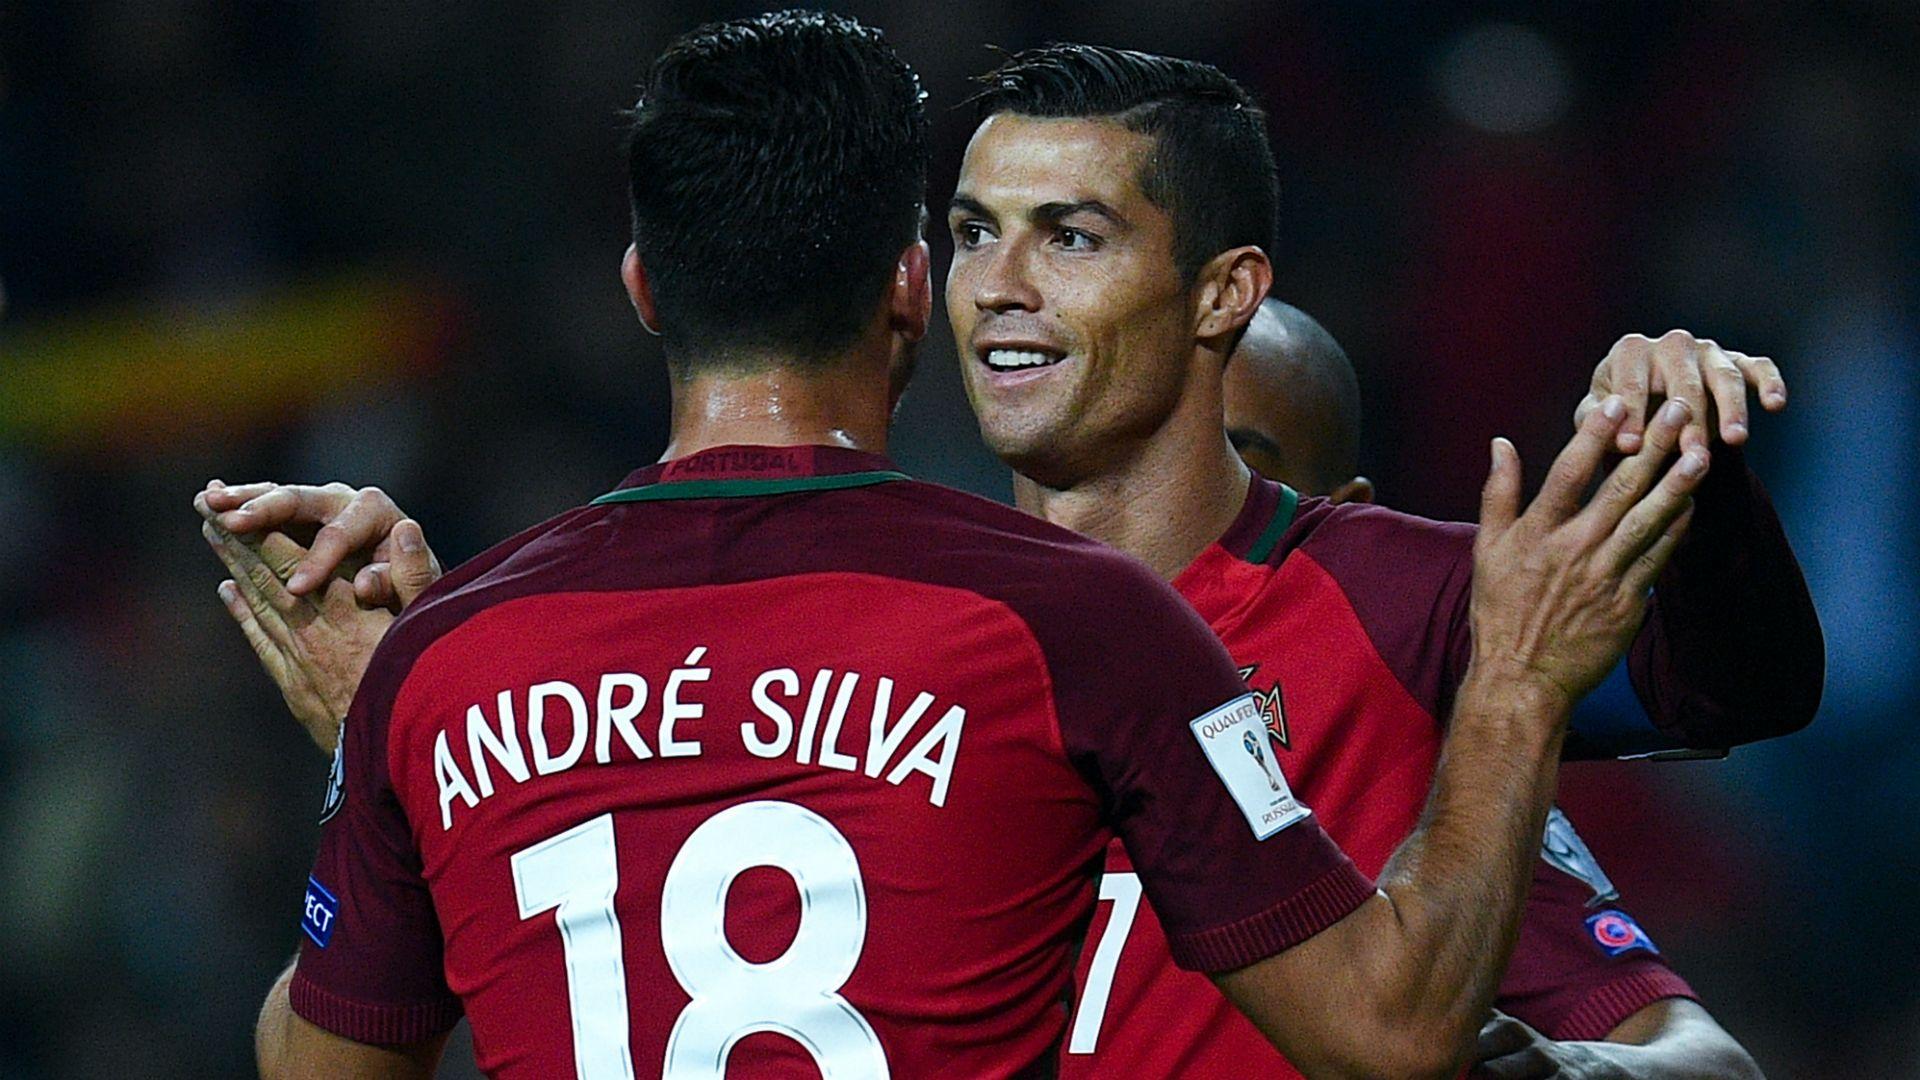 Andre Silva vows to work hard to match Cristiano Ronaldo's praise